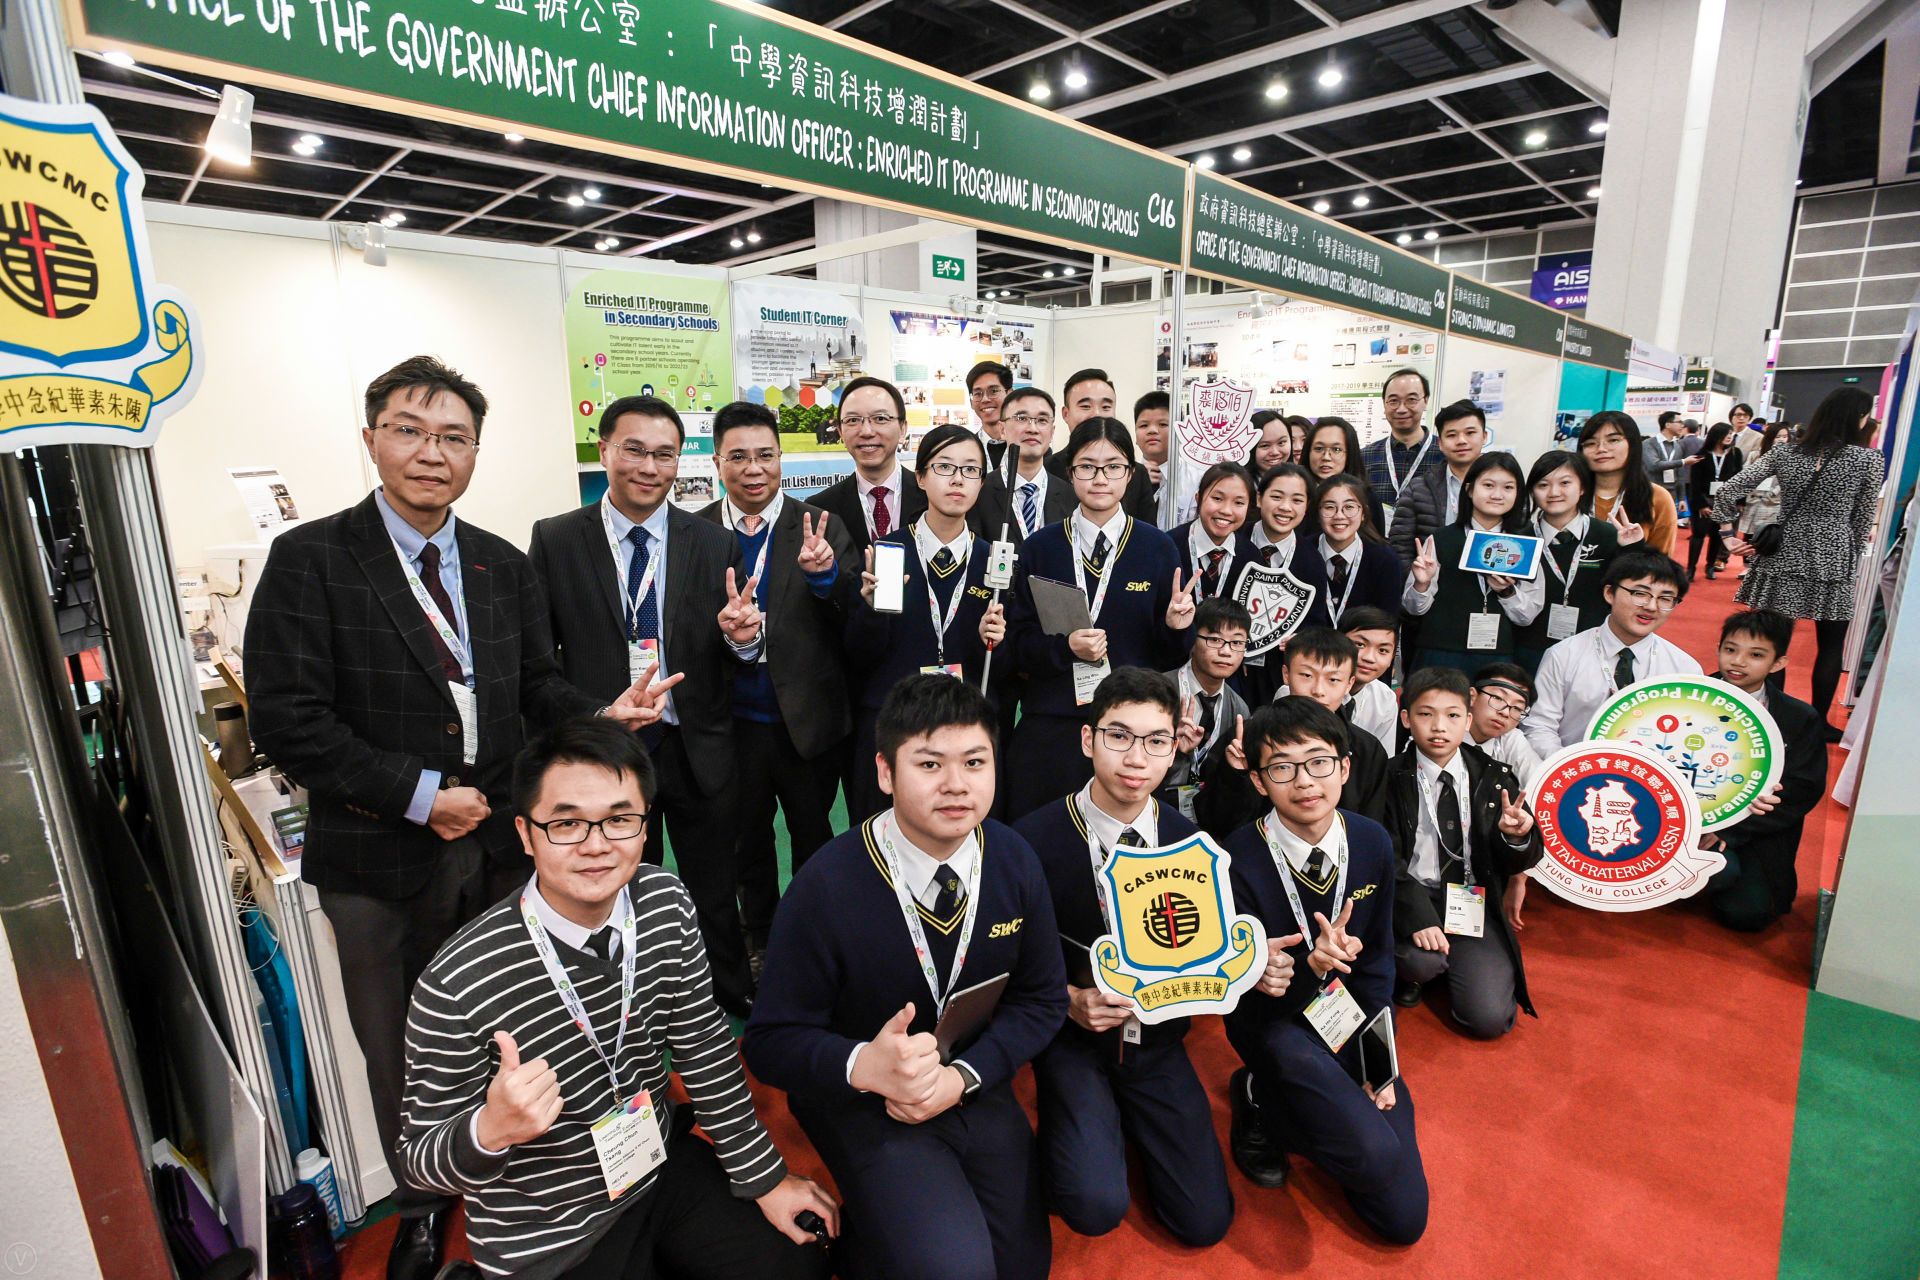 Group photo of Mr Victor Lam, Government Chief Information Officer, with all students and teachers on 11 December 2019.